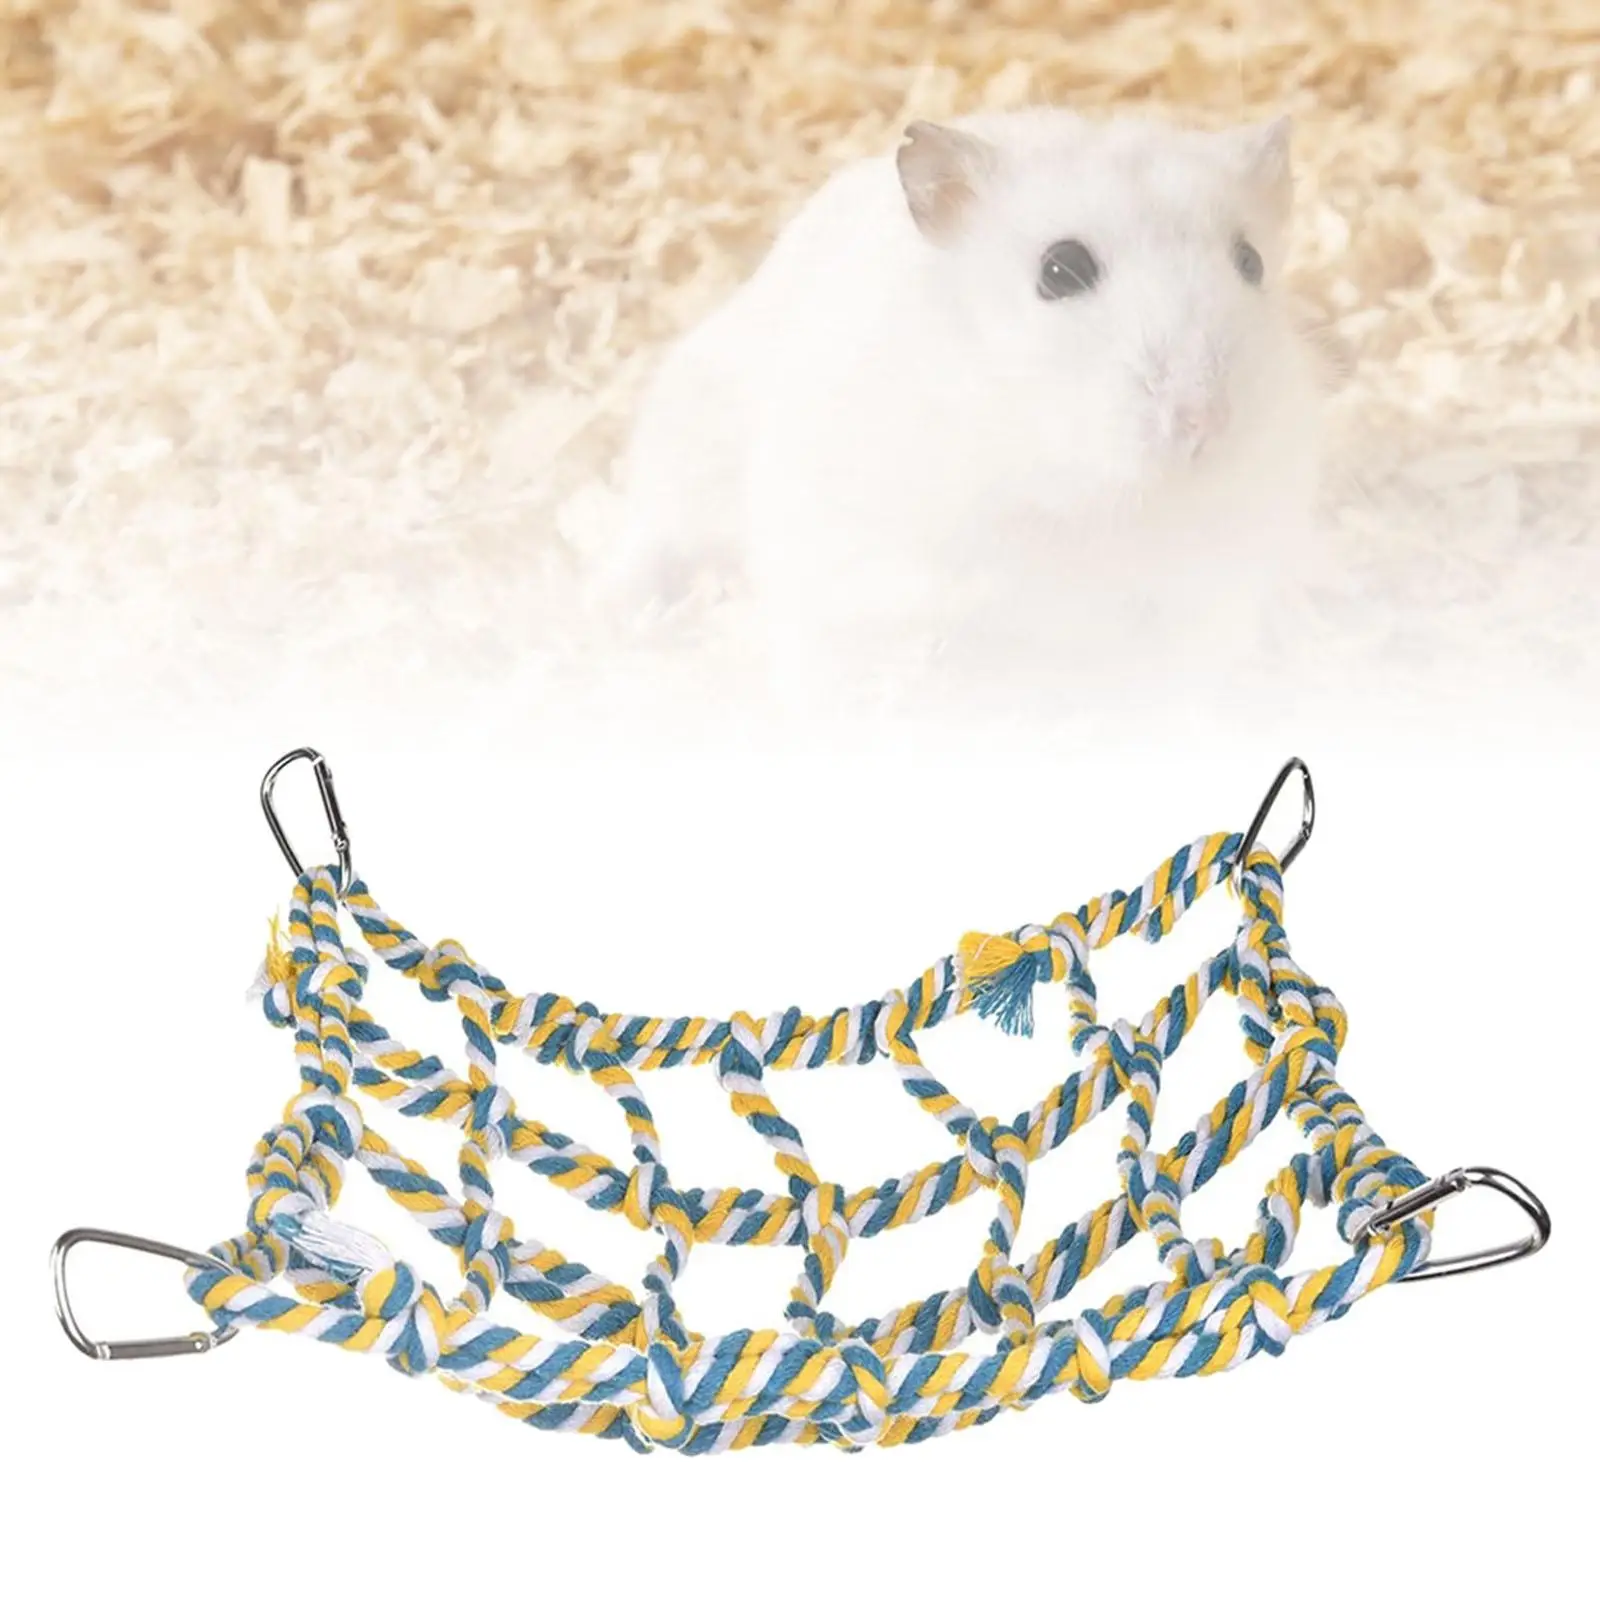 Hamster Hammock Rope Hamster Swing Rope Ladder Climbing Toy for Cockatiel